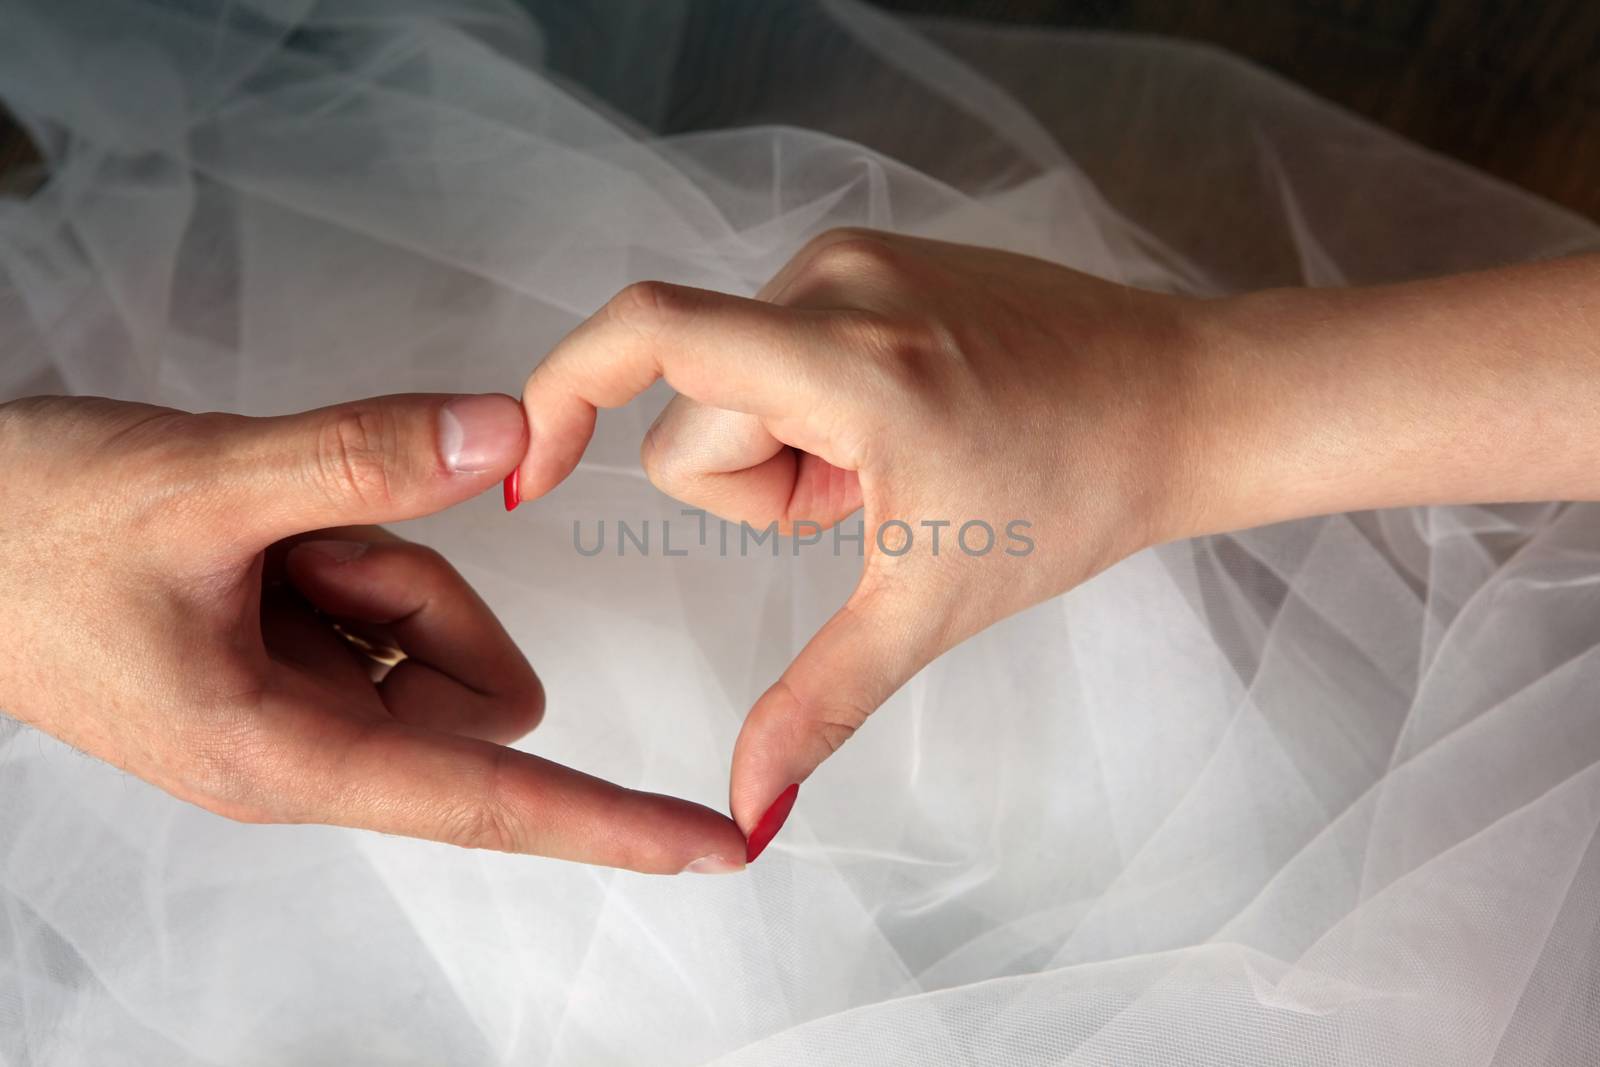 The bride and groom make a heart out of the fingers